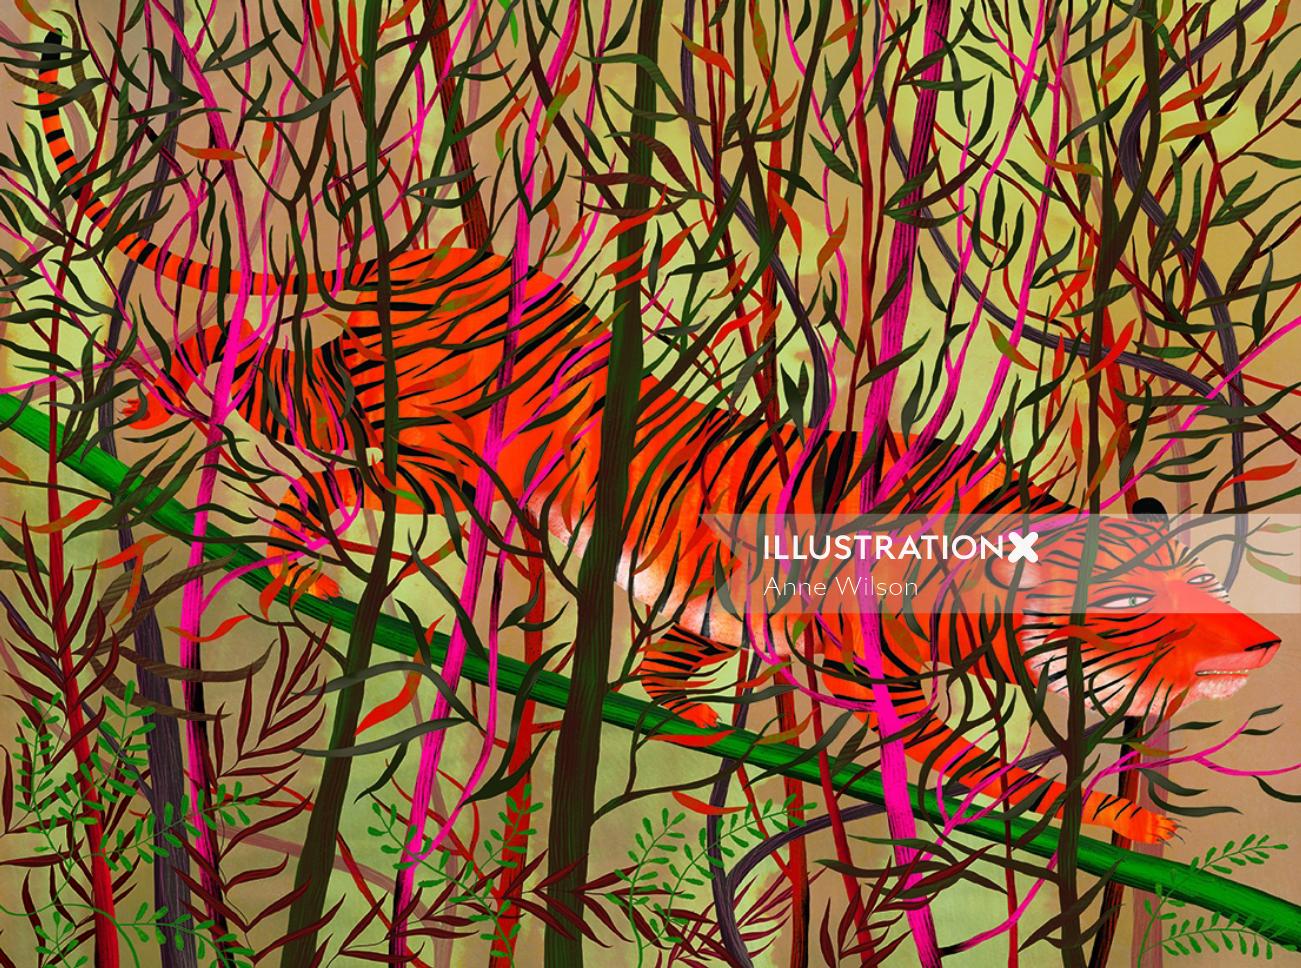 tiger, leaves, branches, trees, jungle, camouflage